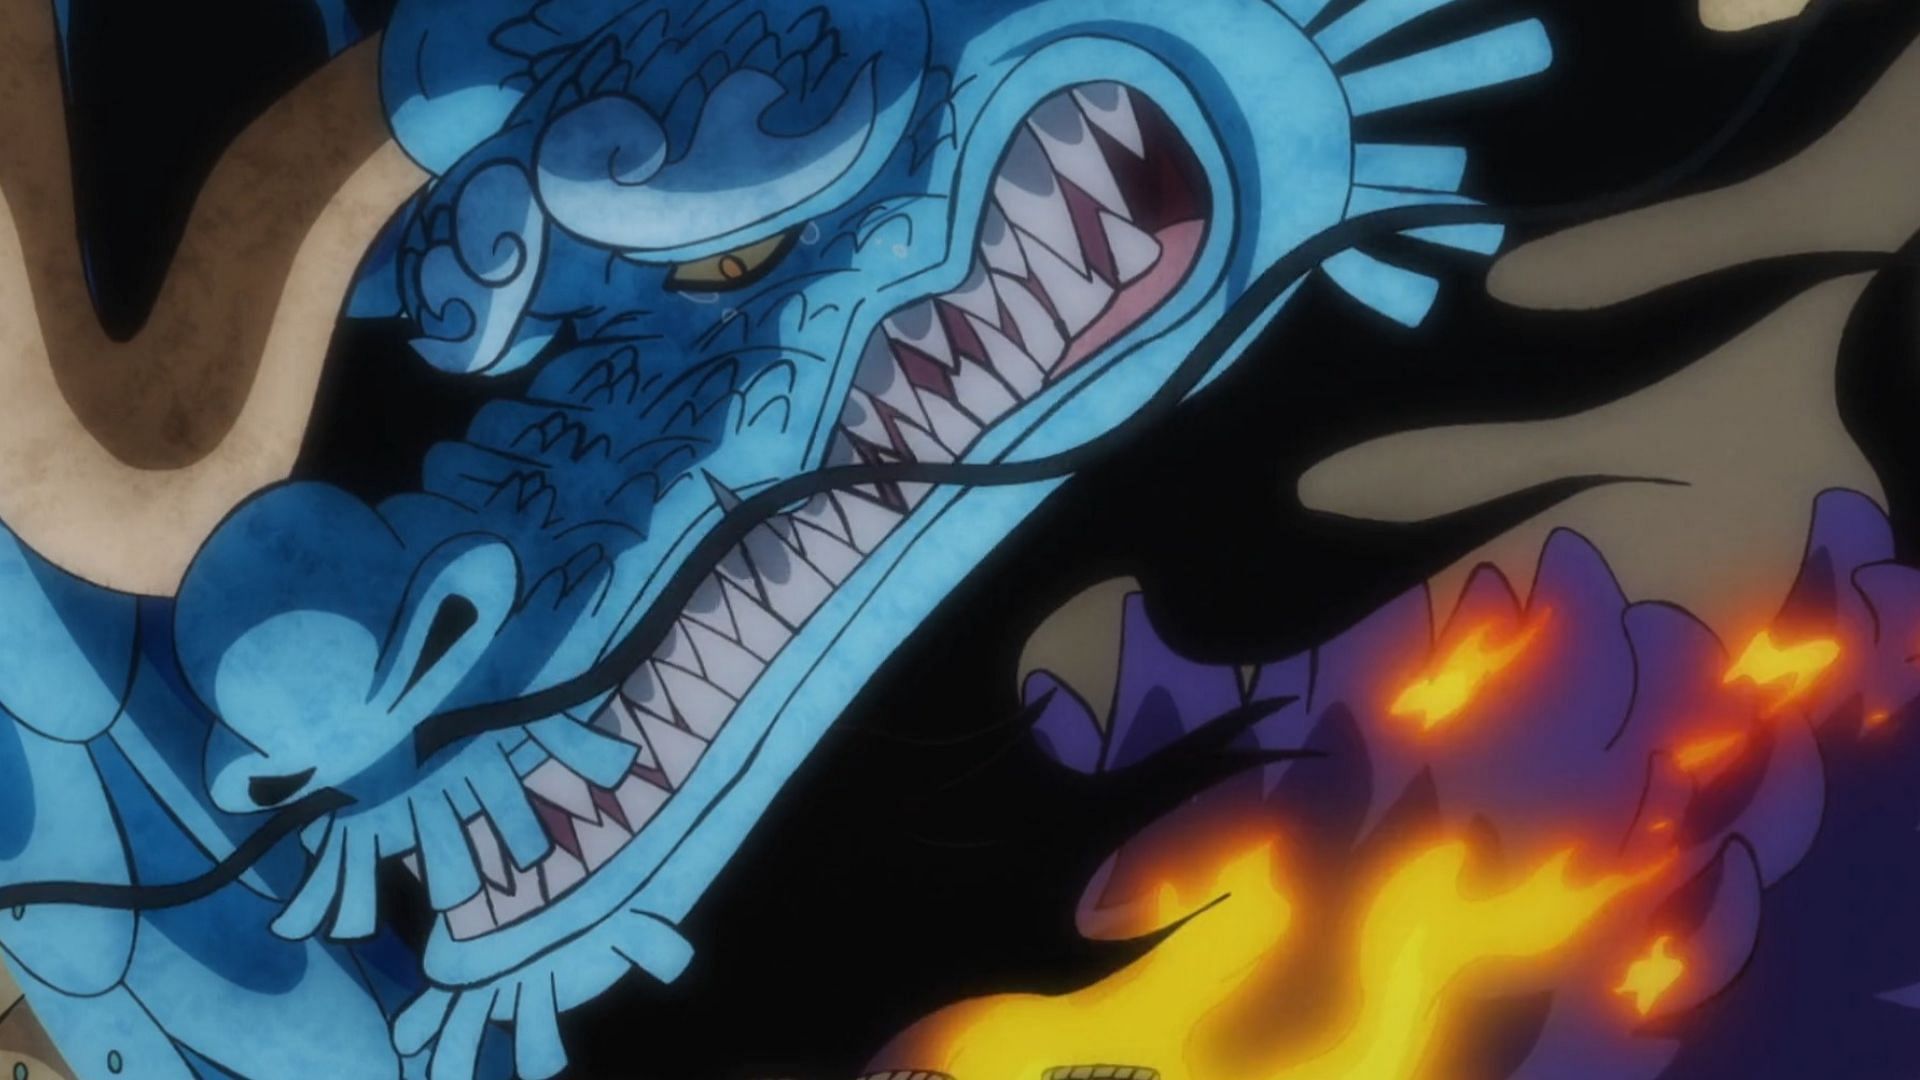 Kaido crying in One Piece episode 1064 (Image via Toei Animation)